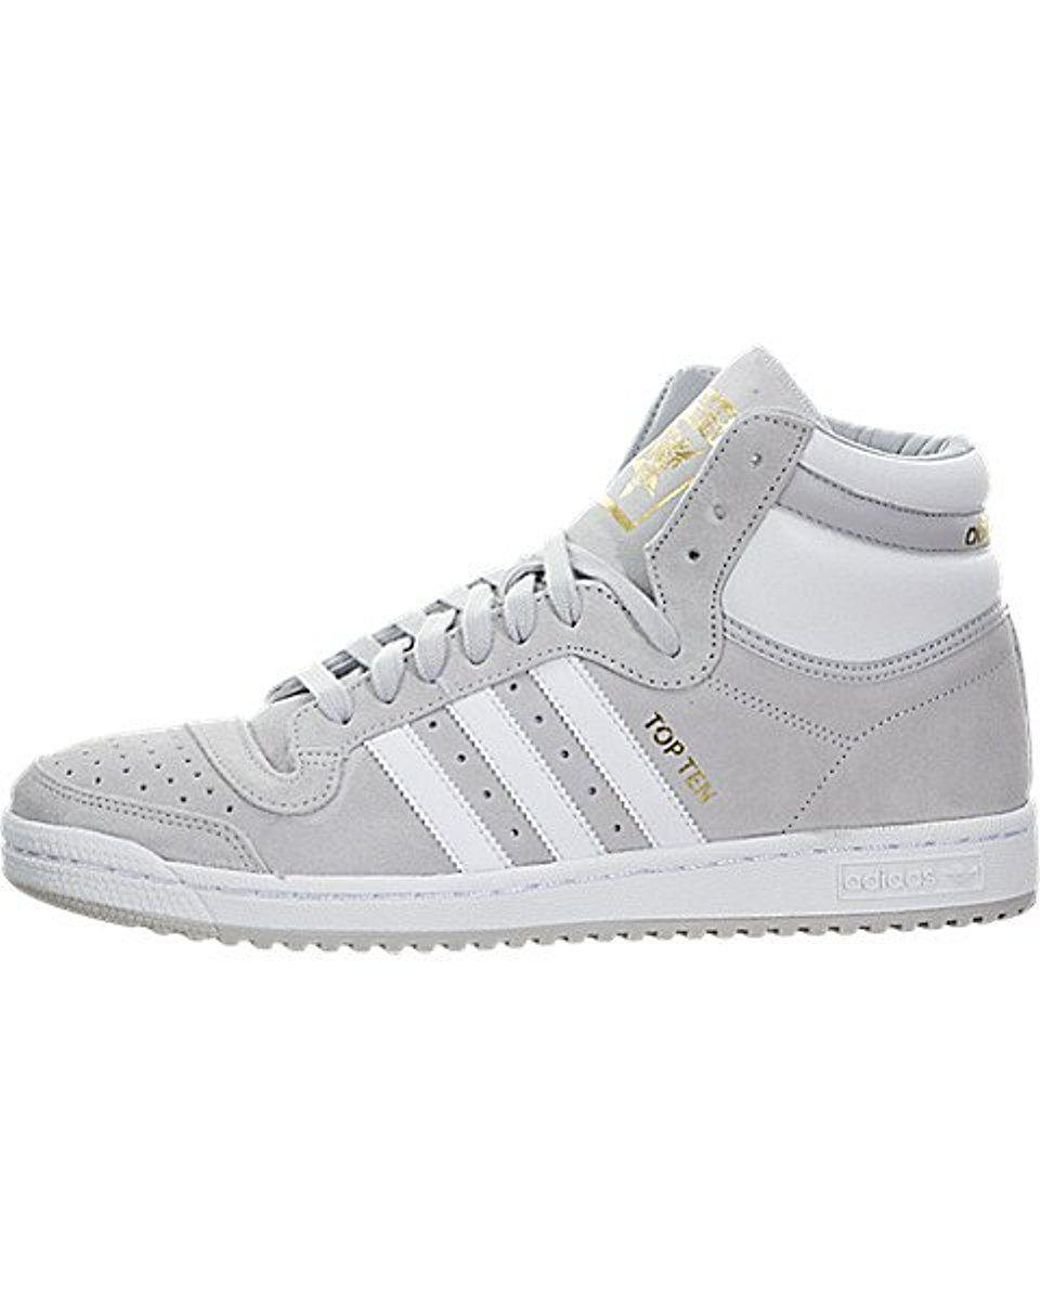 Accustomed to Gladys Adulthood adidas Originals Leather Top Ten Hi Basketball Shoe in Gray for Men | Lyst